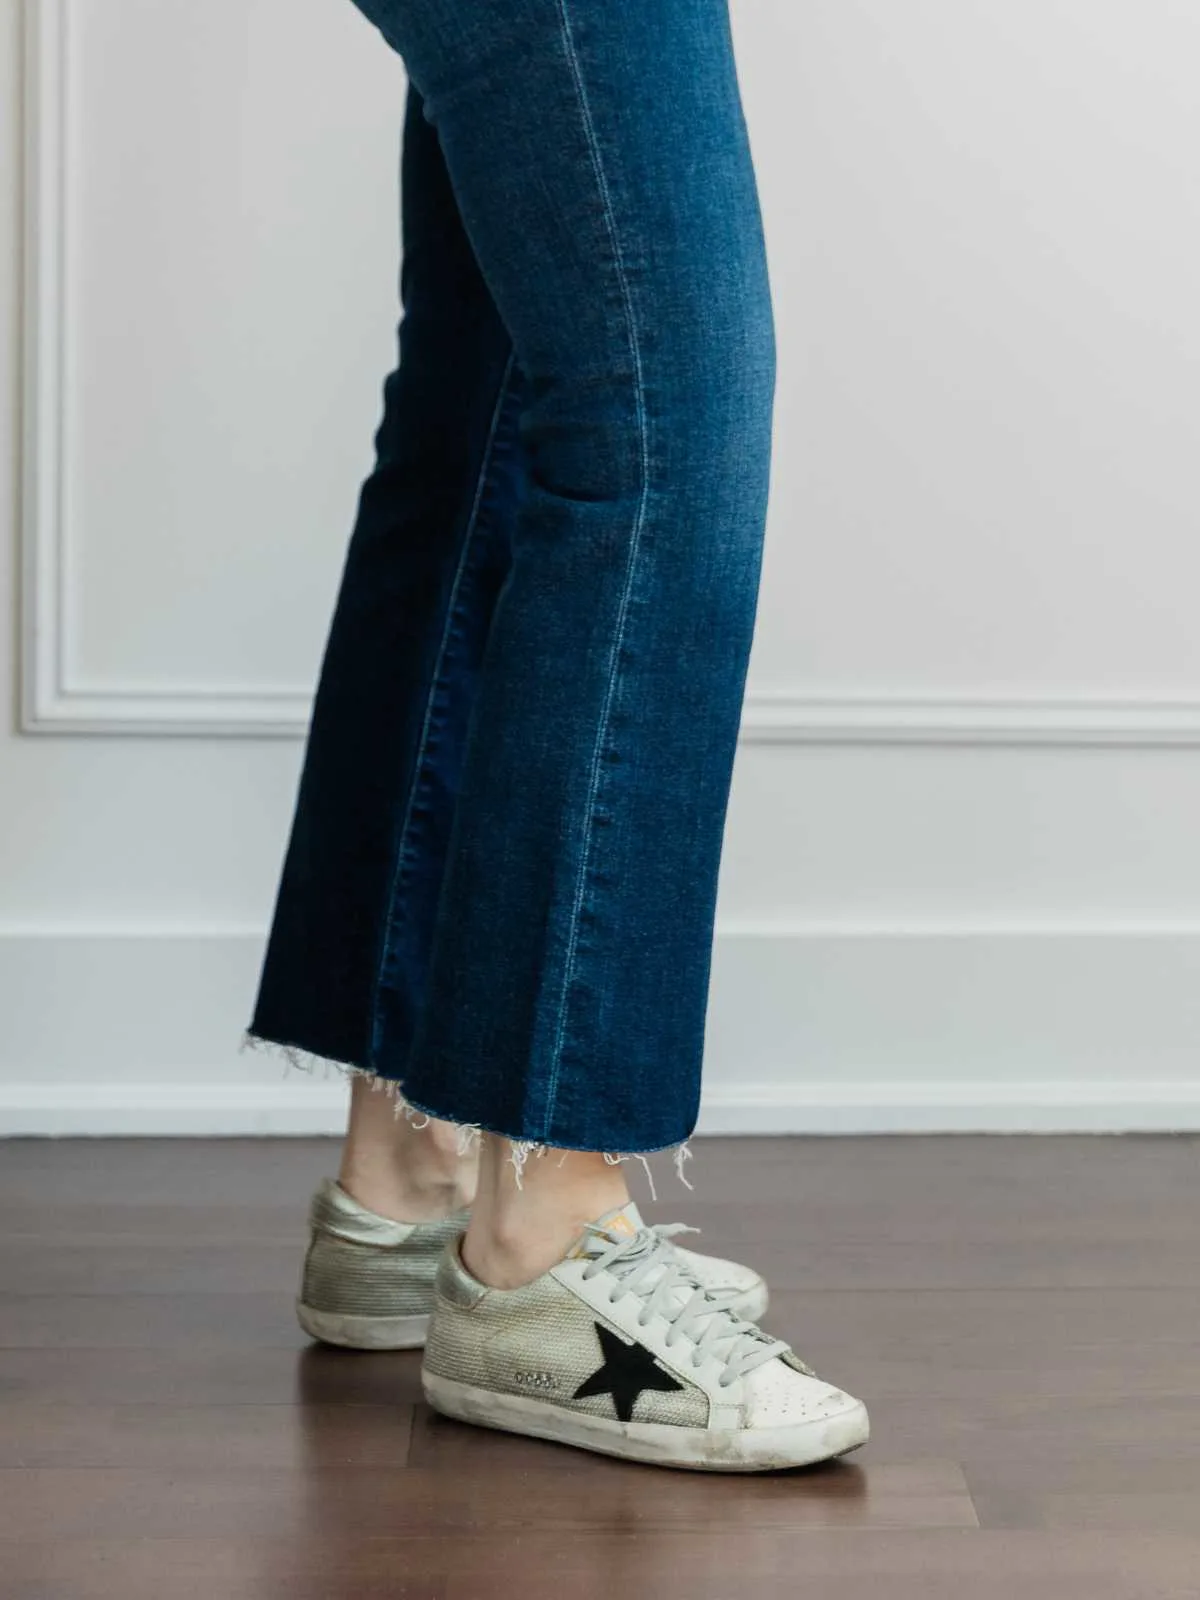 Cropped view of woman's legs wearing   sleek sneakers with kick flares